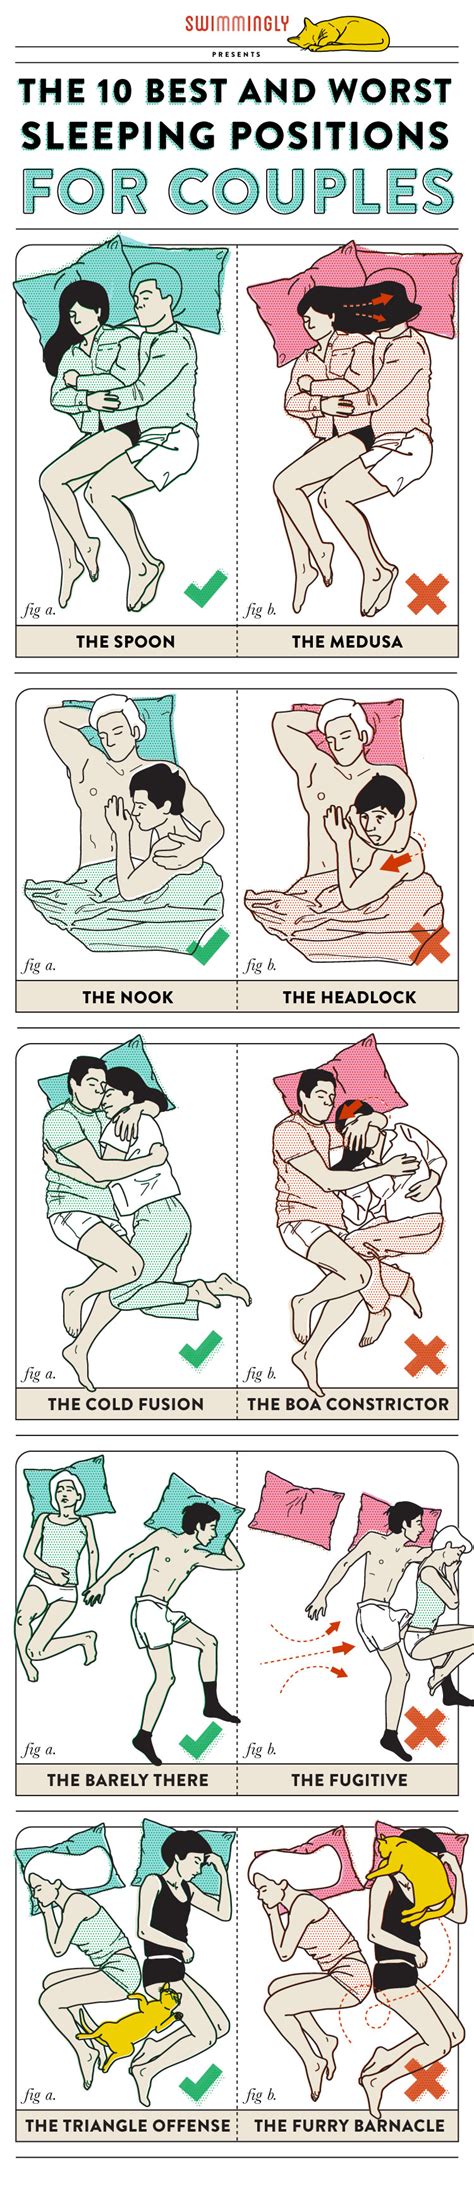 the best and worst sleeping positions for couples will remind you how